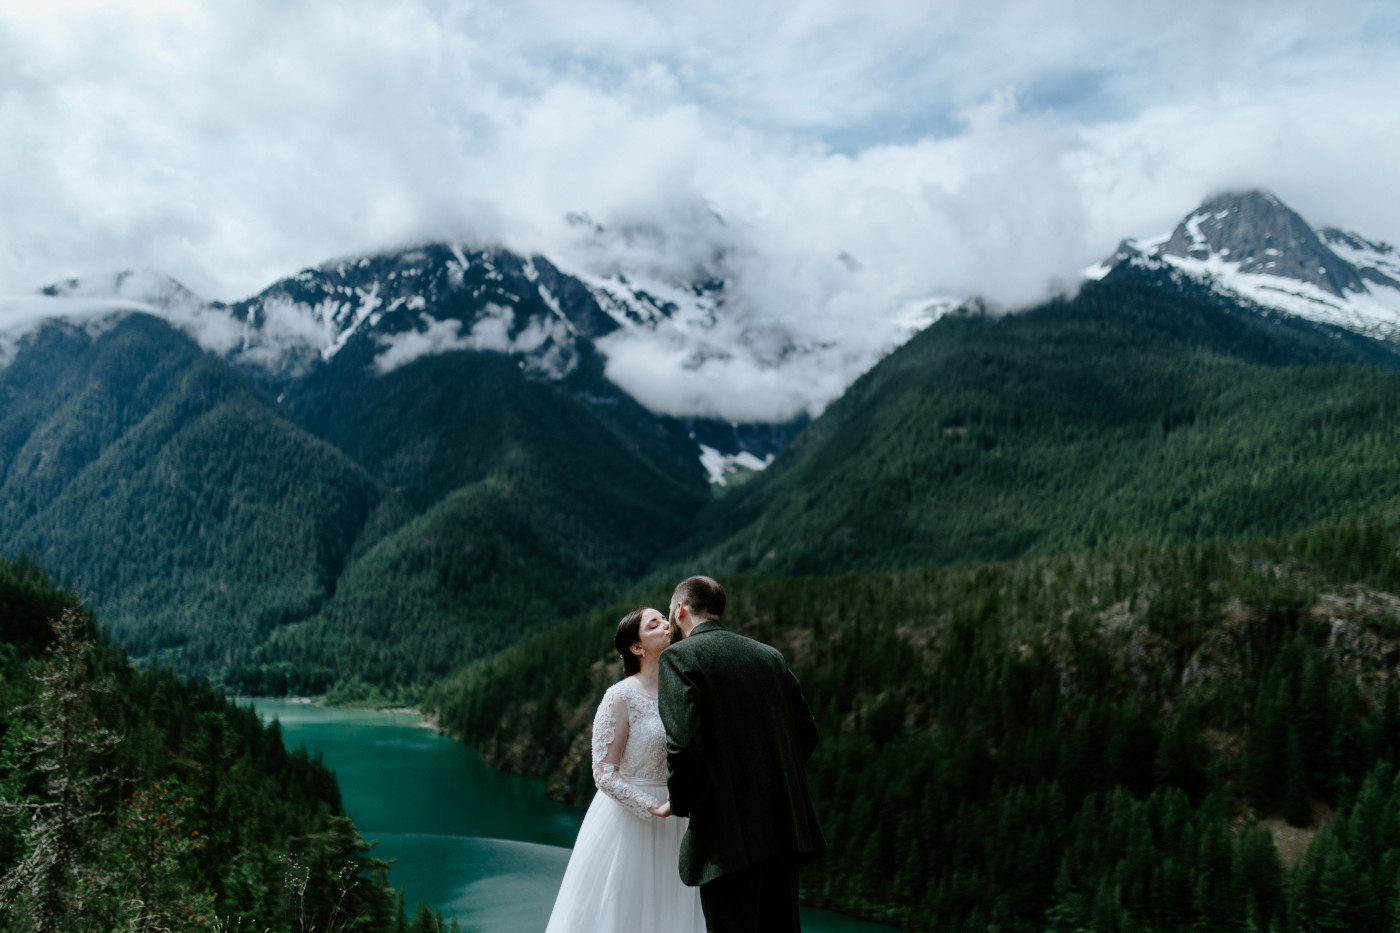 Elizabeth and Alex kissing. Elopement photography at North Cascades National Park by Sienna Plus Josh.